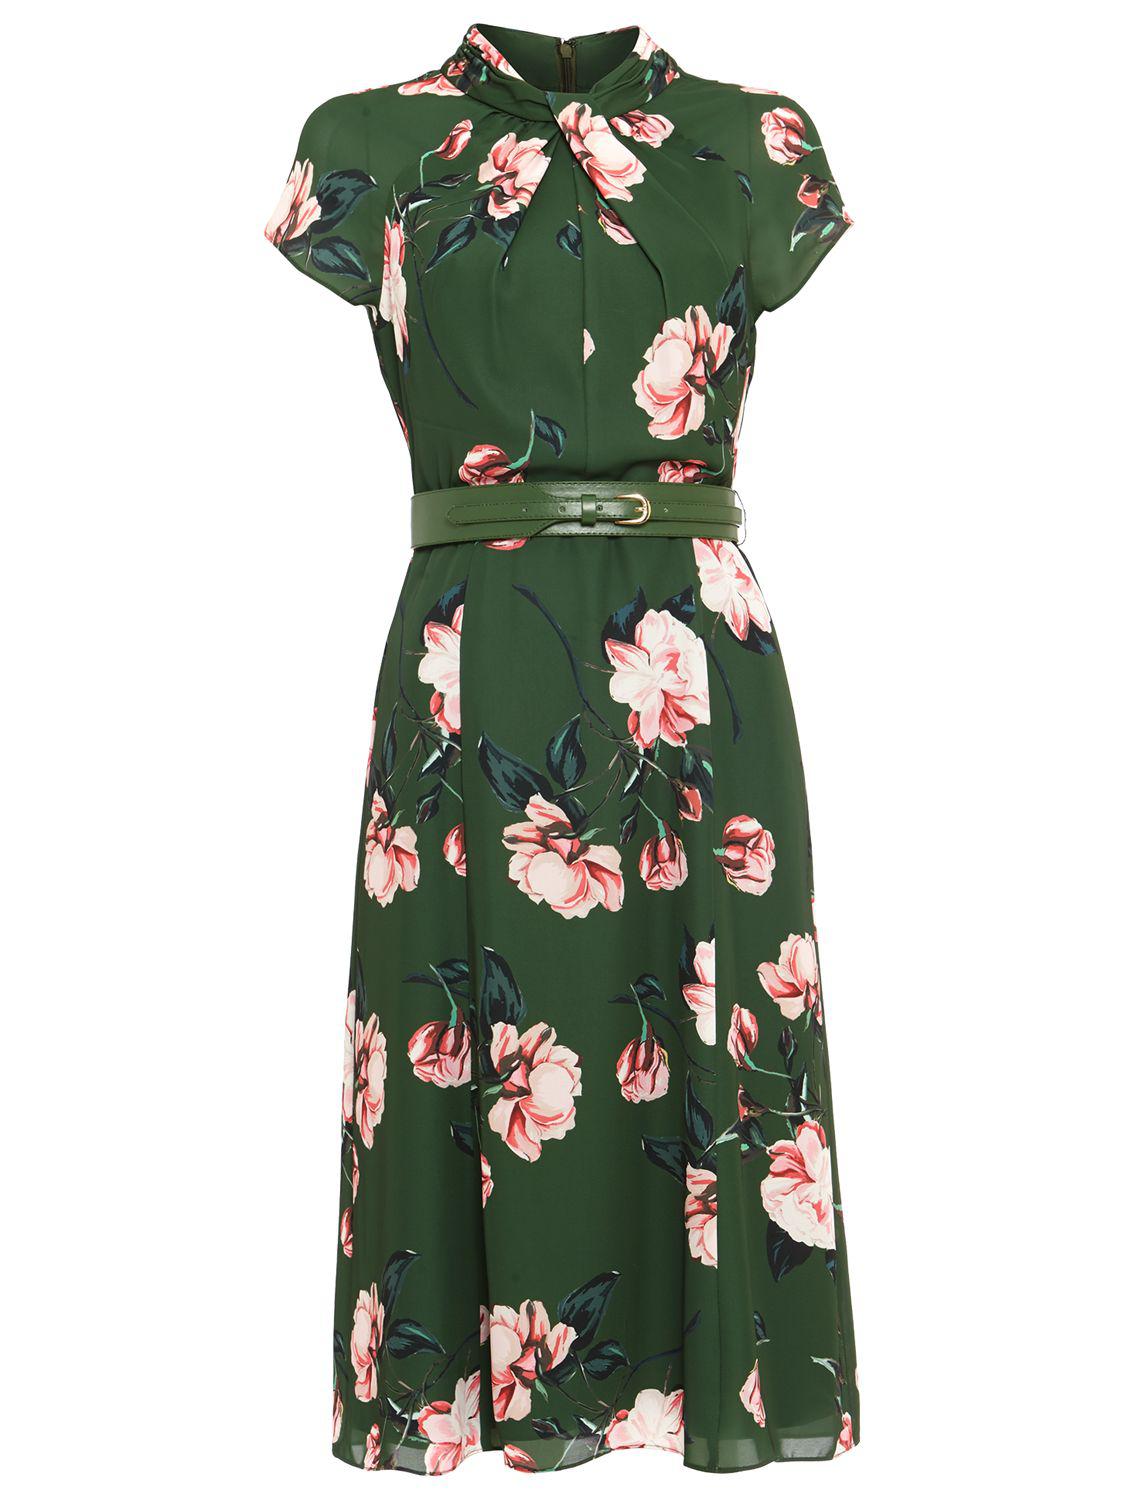 Phase Eight Synthetic Helena Floral Belted Dress in Jade (Green) - Lyst